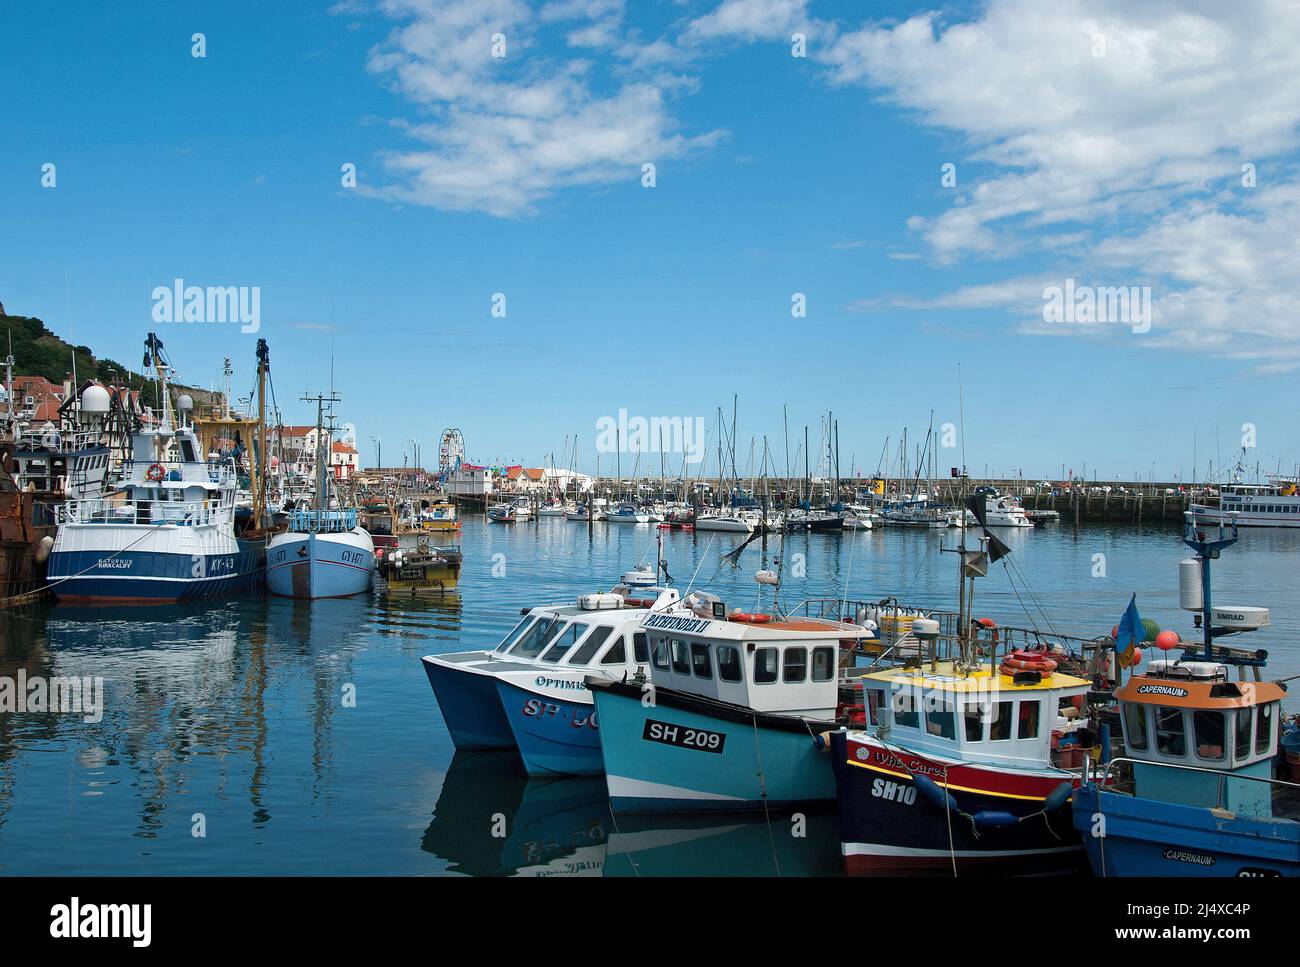 Fishing boats at their moorings, Scarborough, North Yorkshire UK Stock Photo